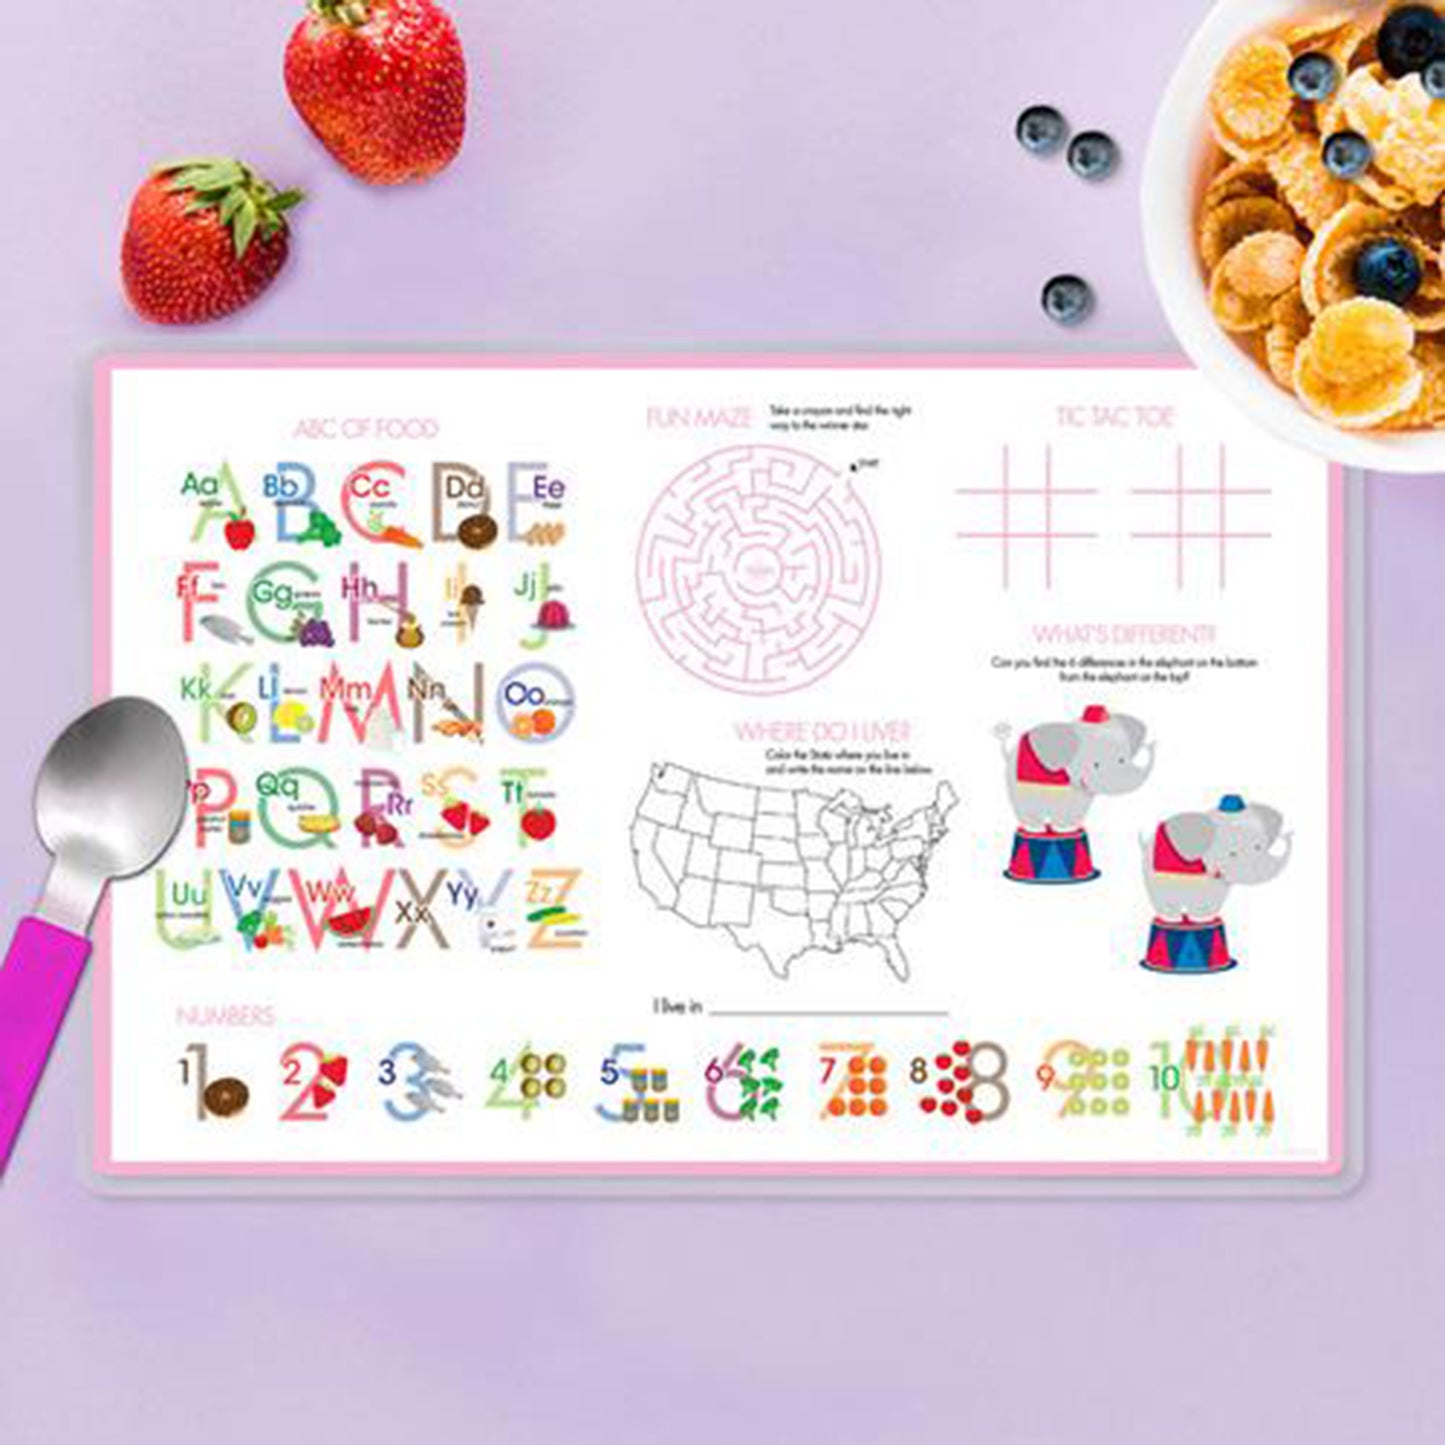 A Shiny Pink Letter Personalized Kids Placemat - Give Wink